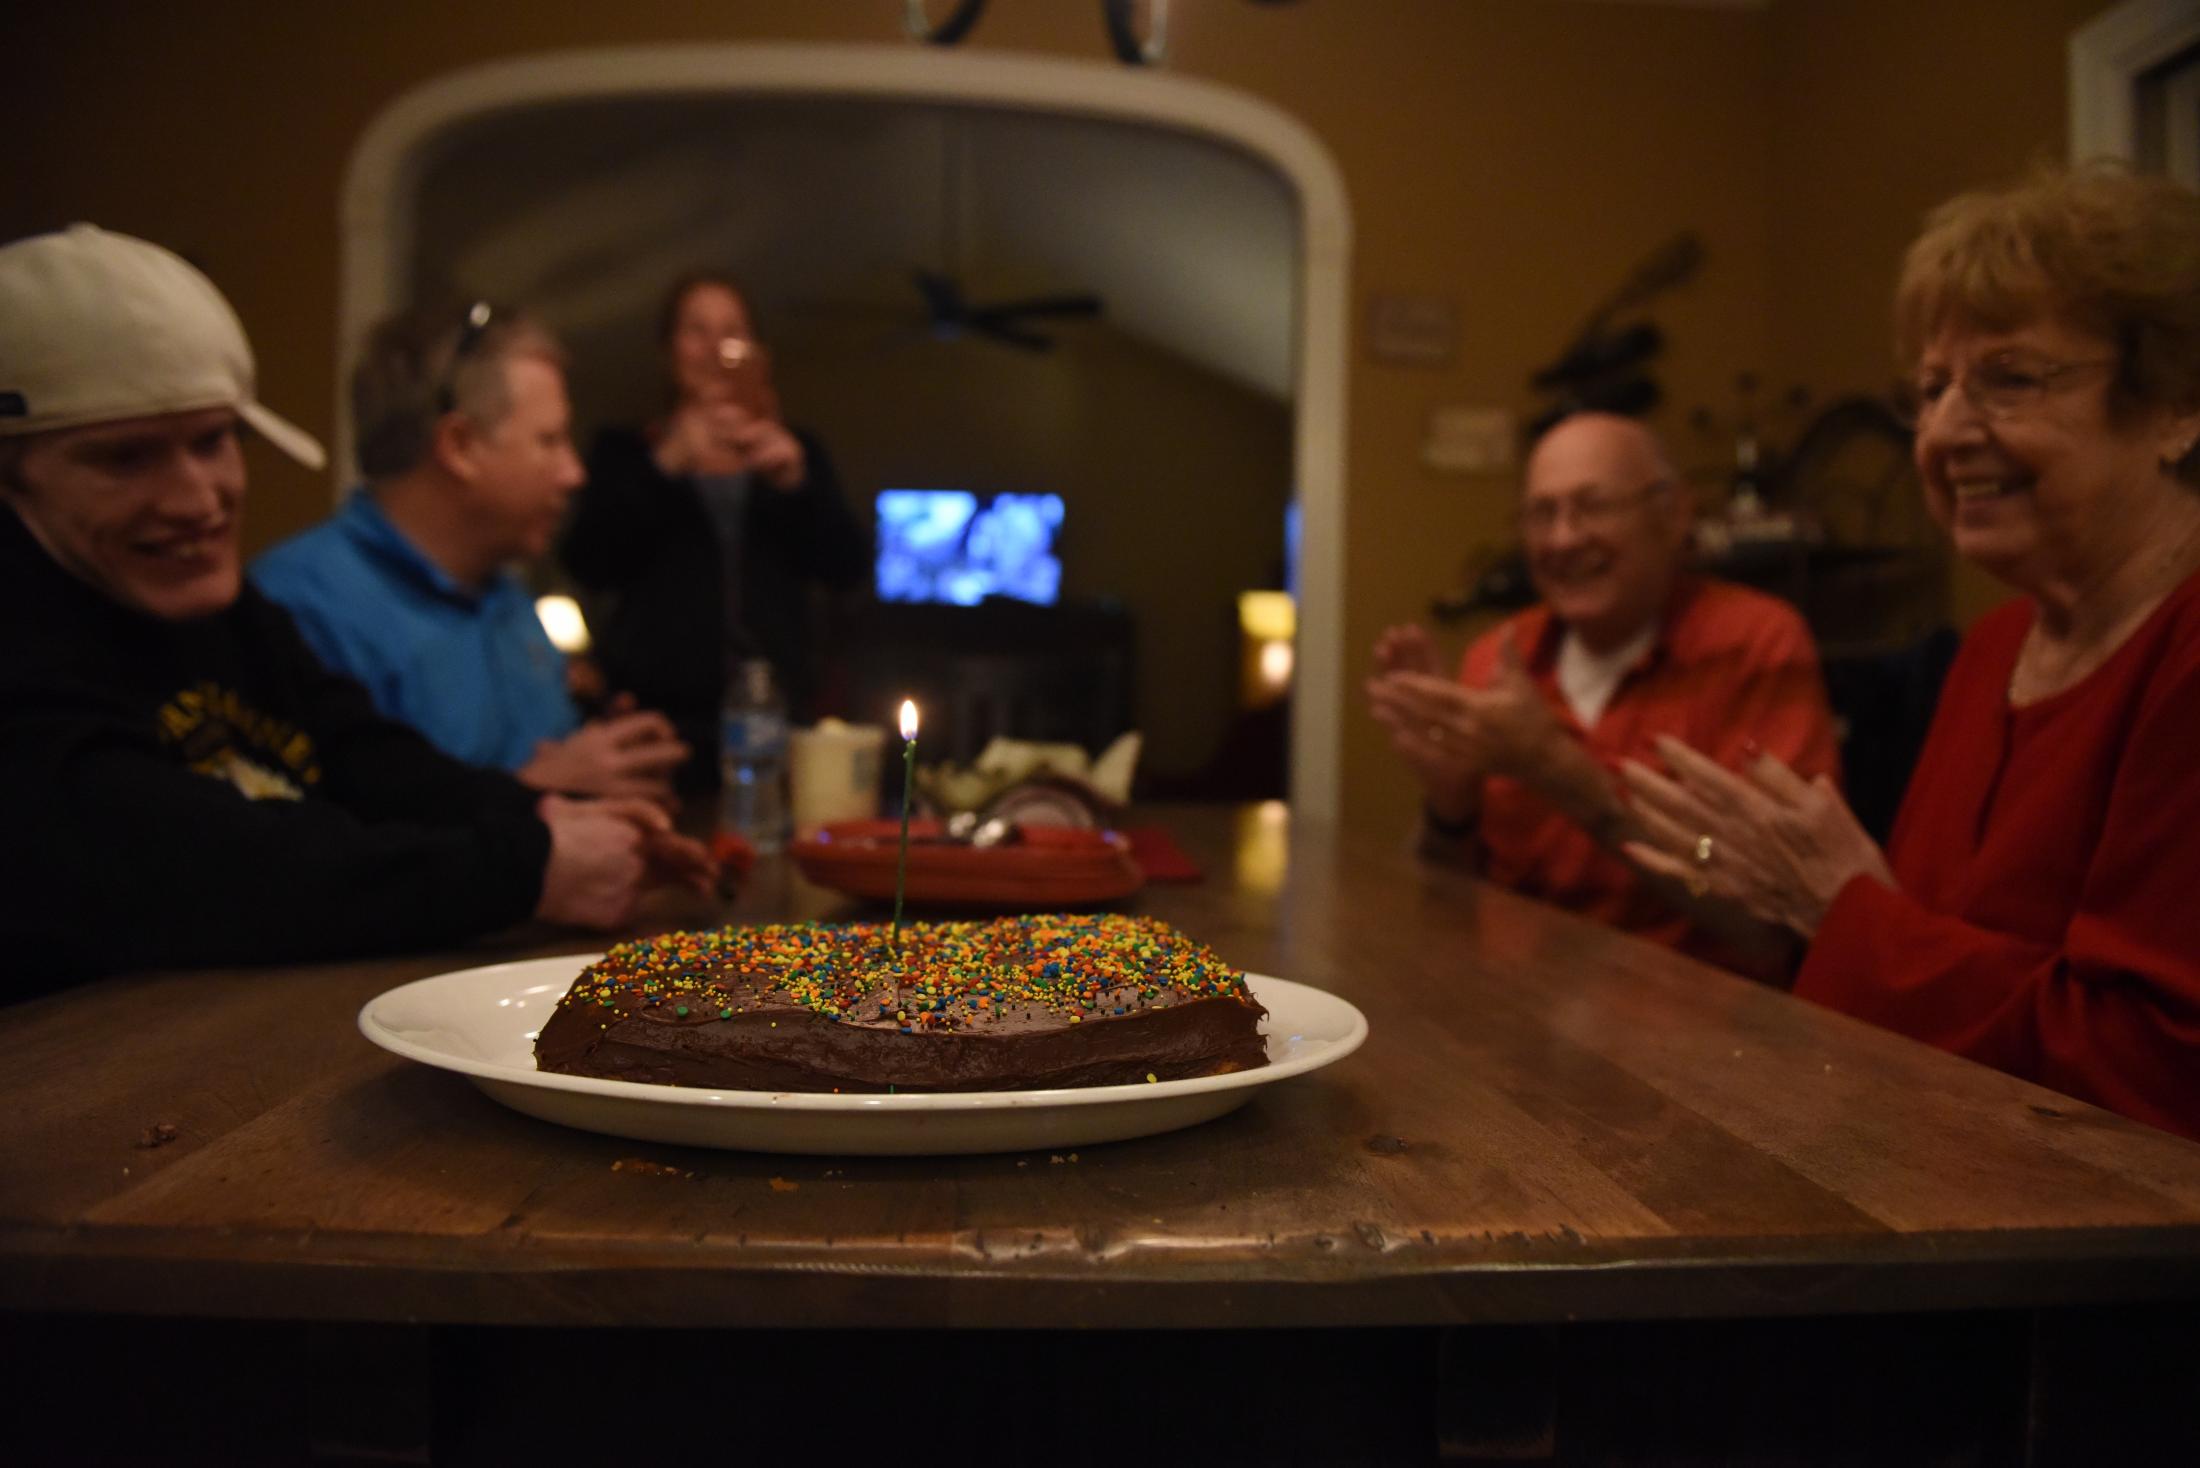  My family and I celebrated my birthday with a homemade funfetti cake. They found a single candle pushed to the back of a drawer so I could make a wish. It made me so happy to see my family sitting around me. I wish Nathan could have been there at that moment. 